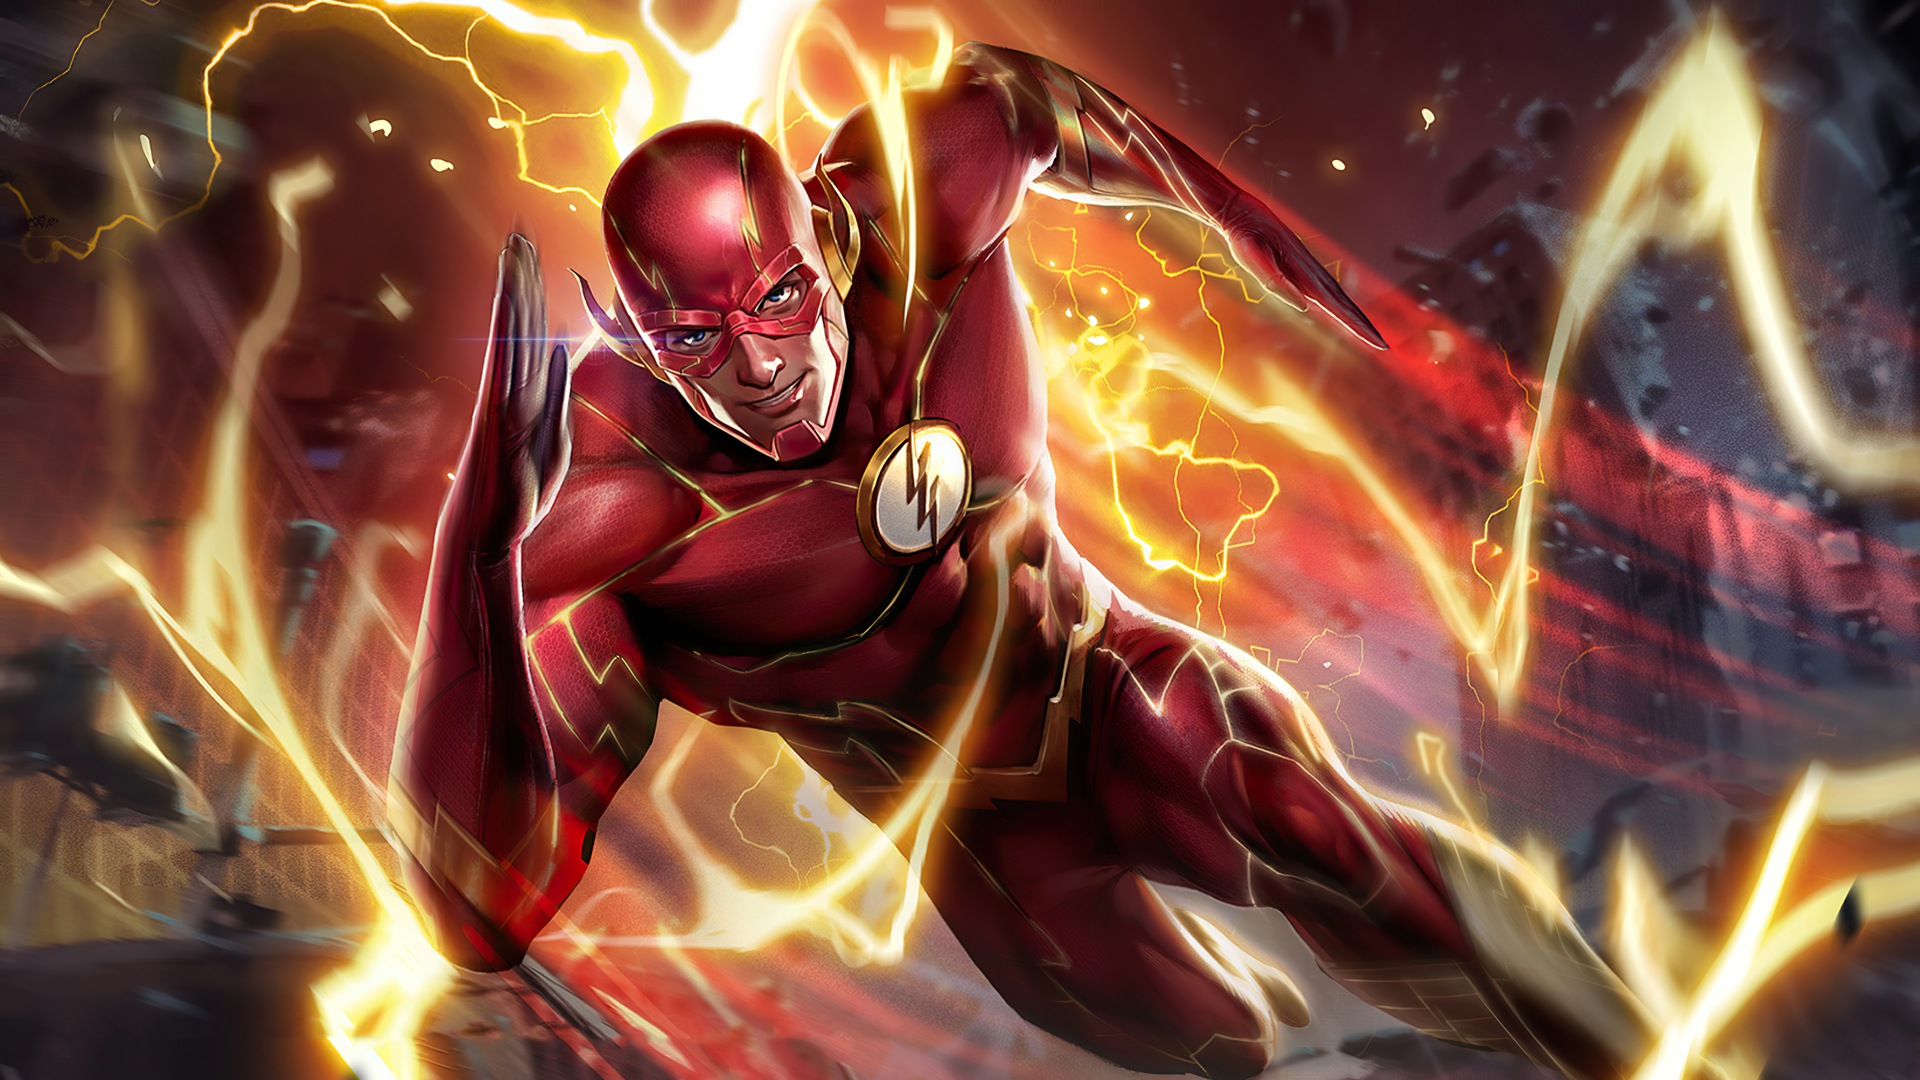 The Flash 2022 Wallpaper, HD TV Series 4K Wallpapers, Images and Background  - Wallpapers Den